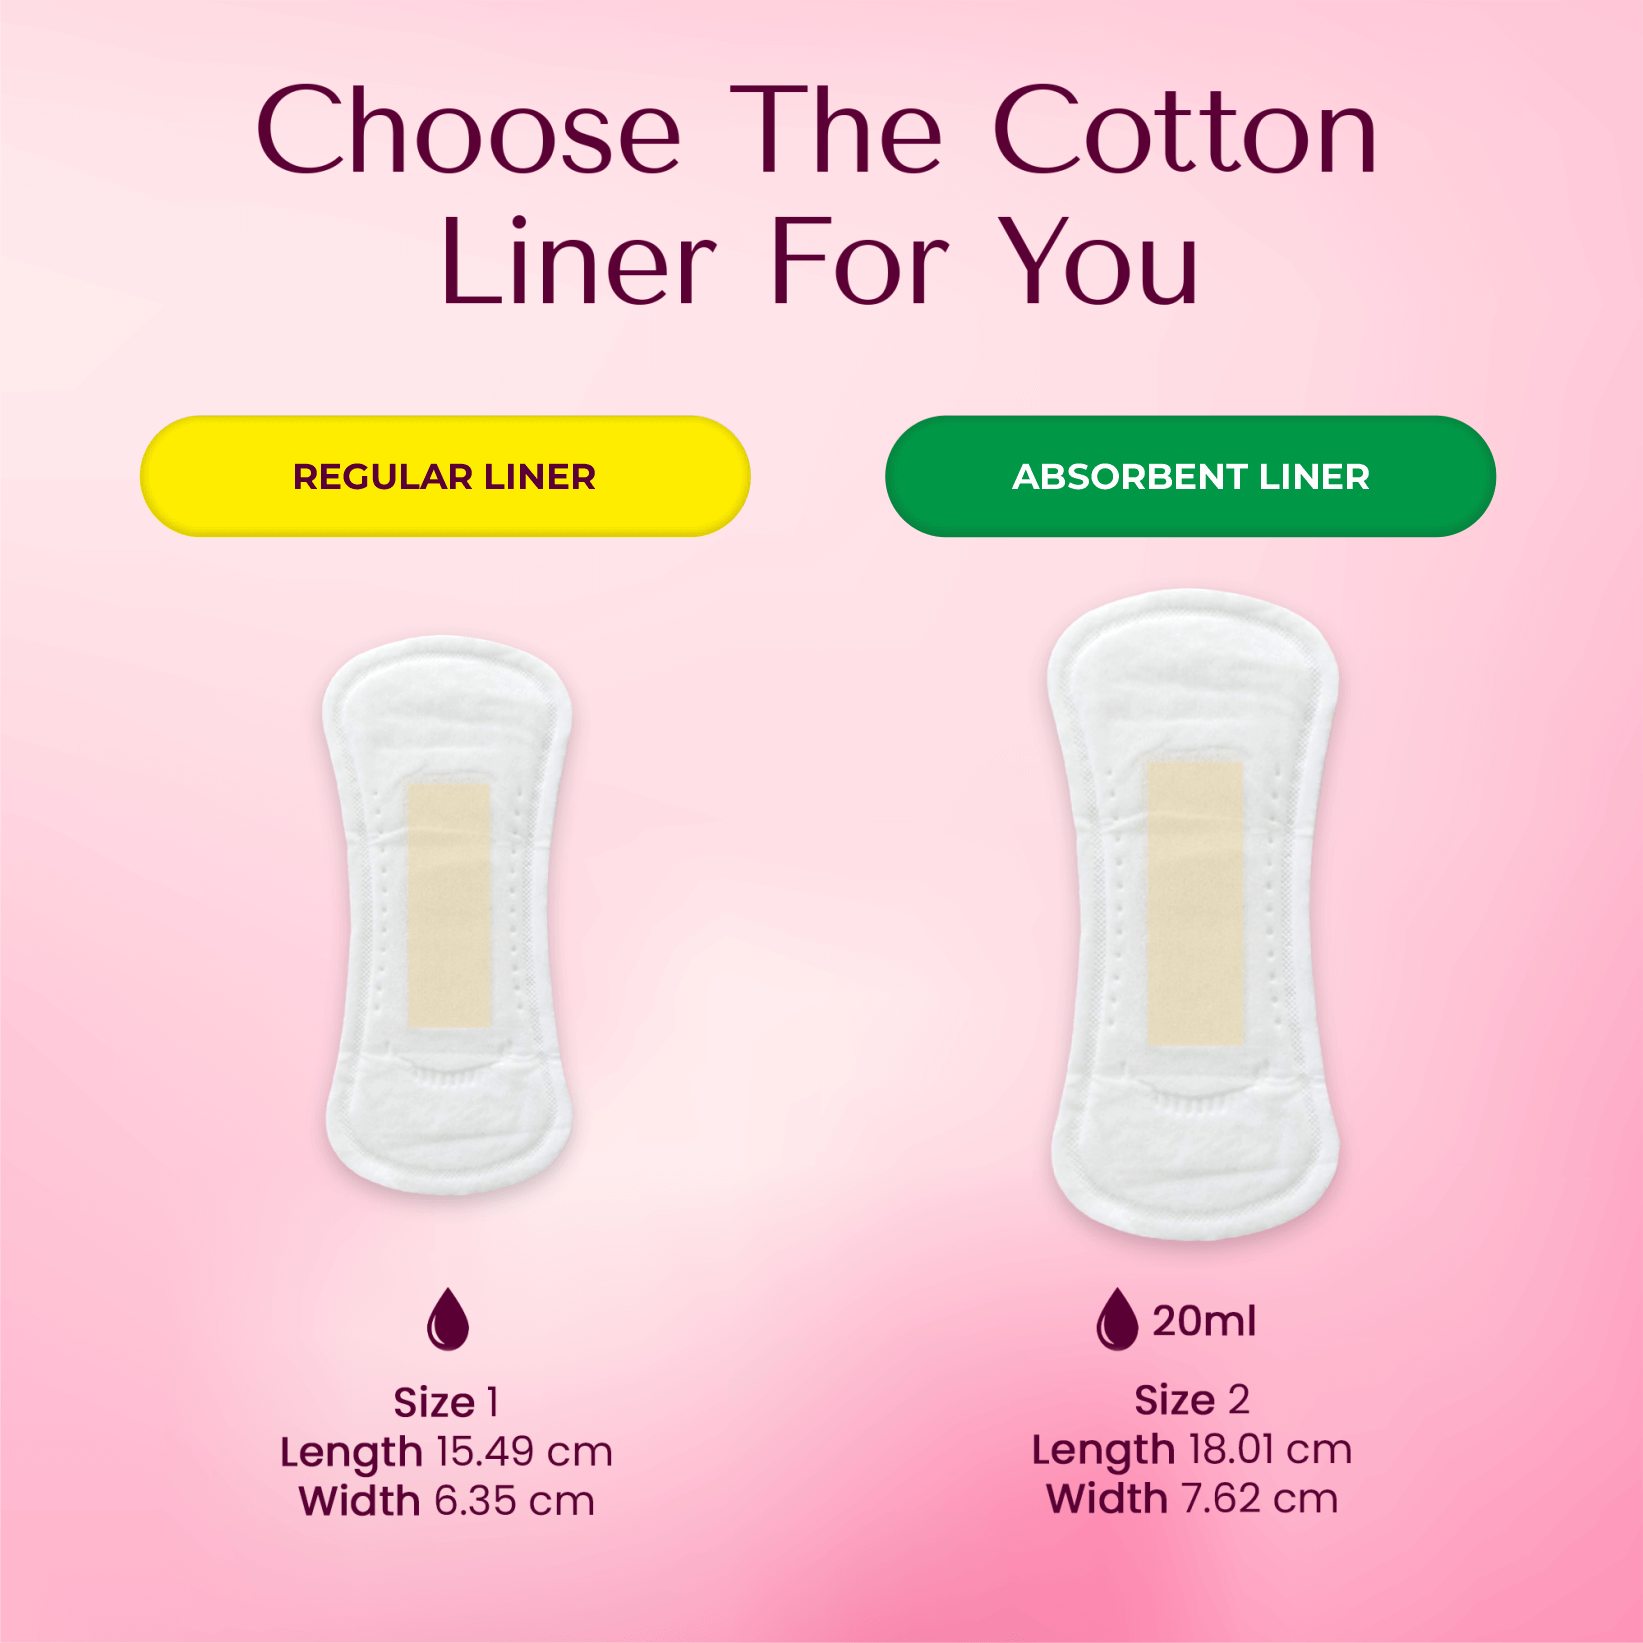 Cotton Liners